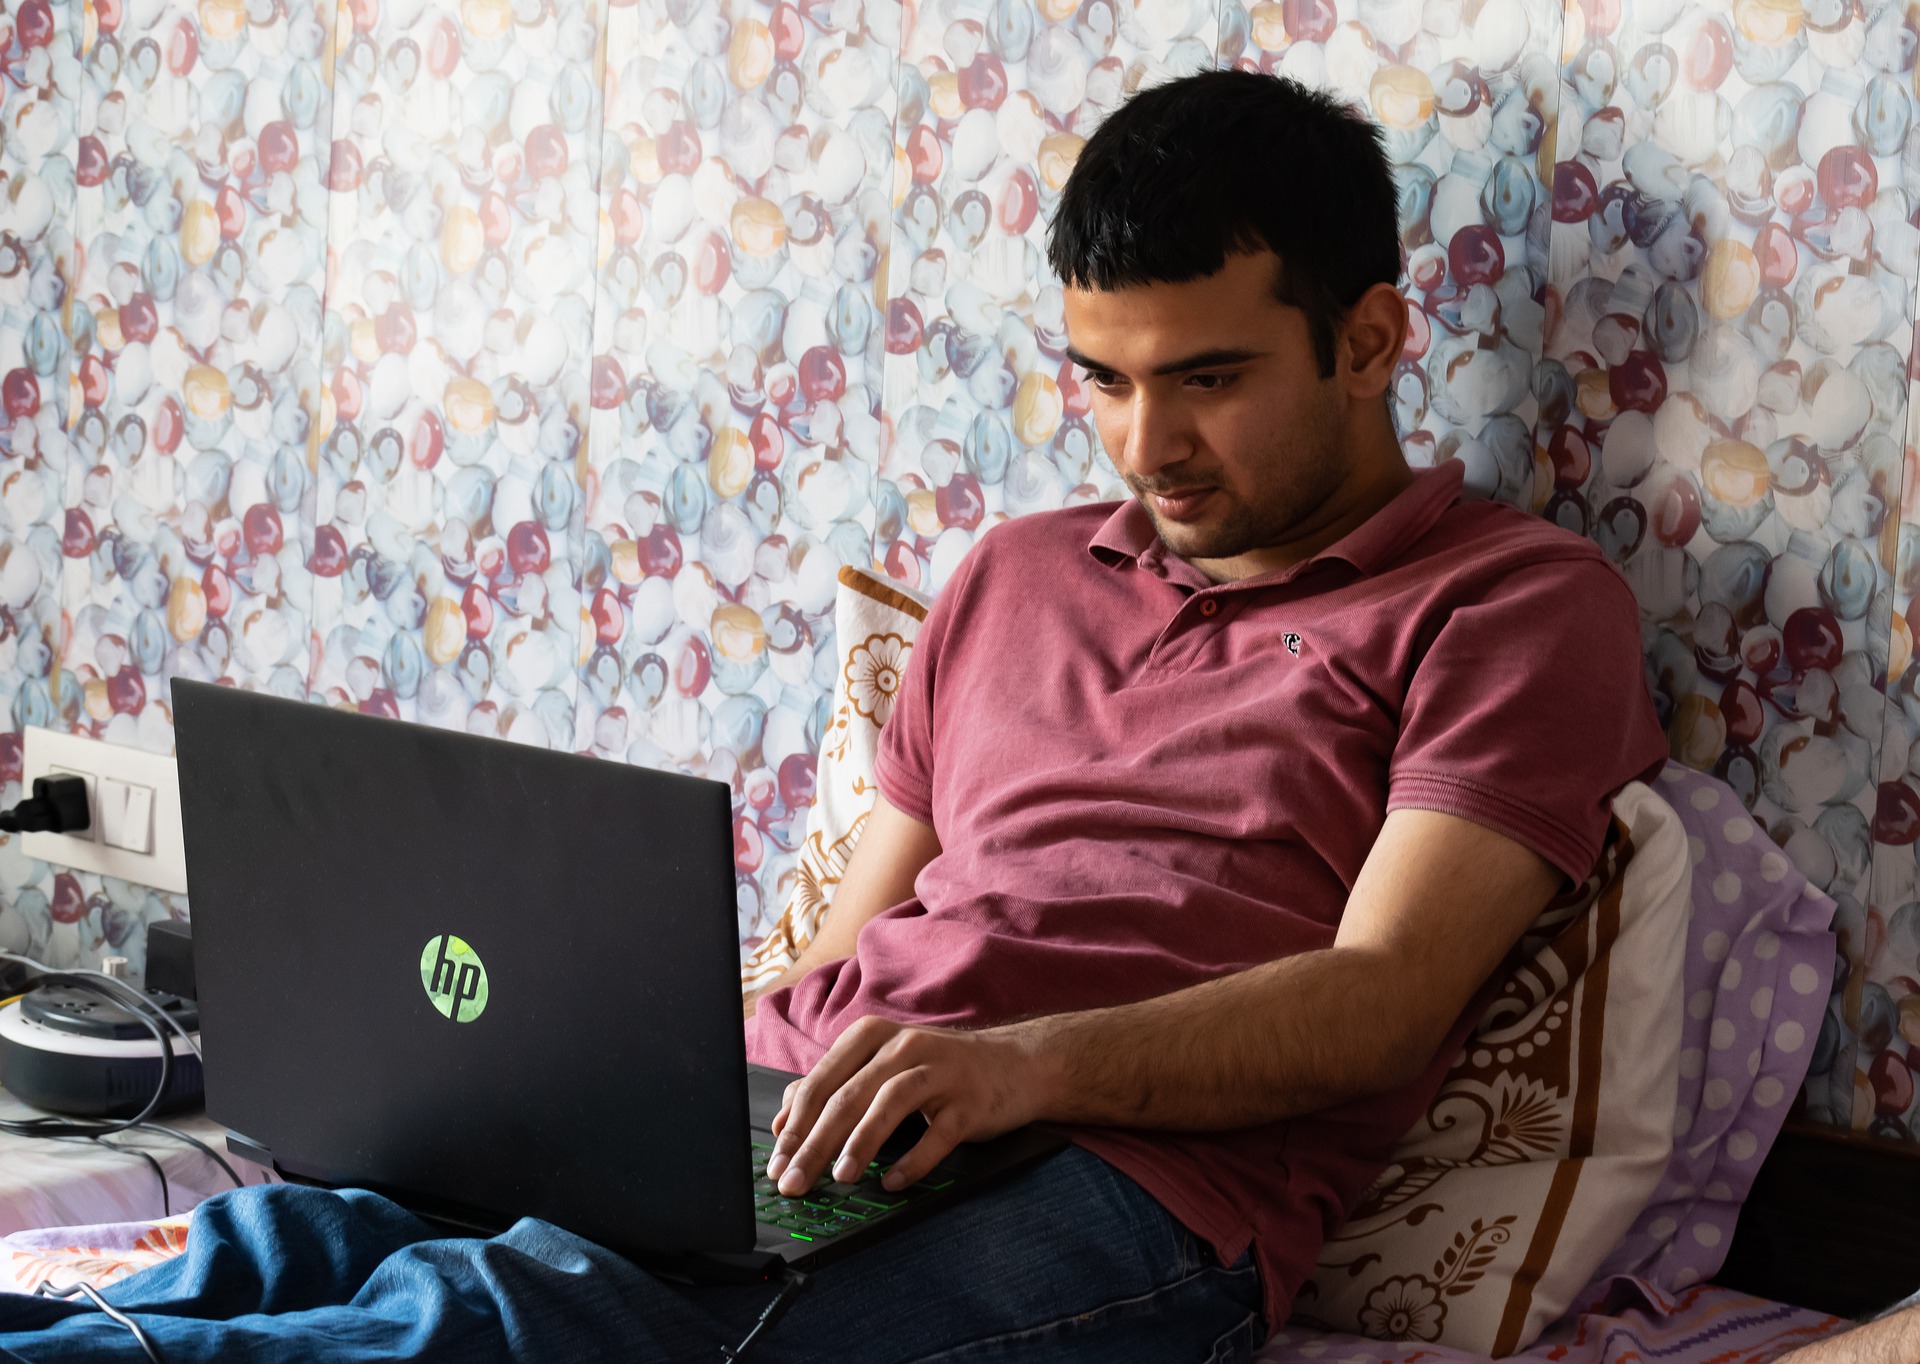 Man hunched over laptop